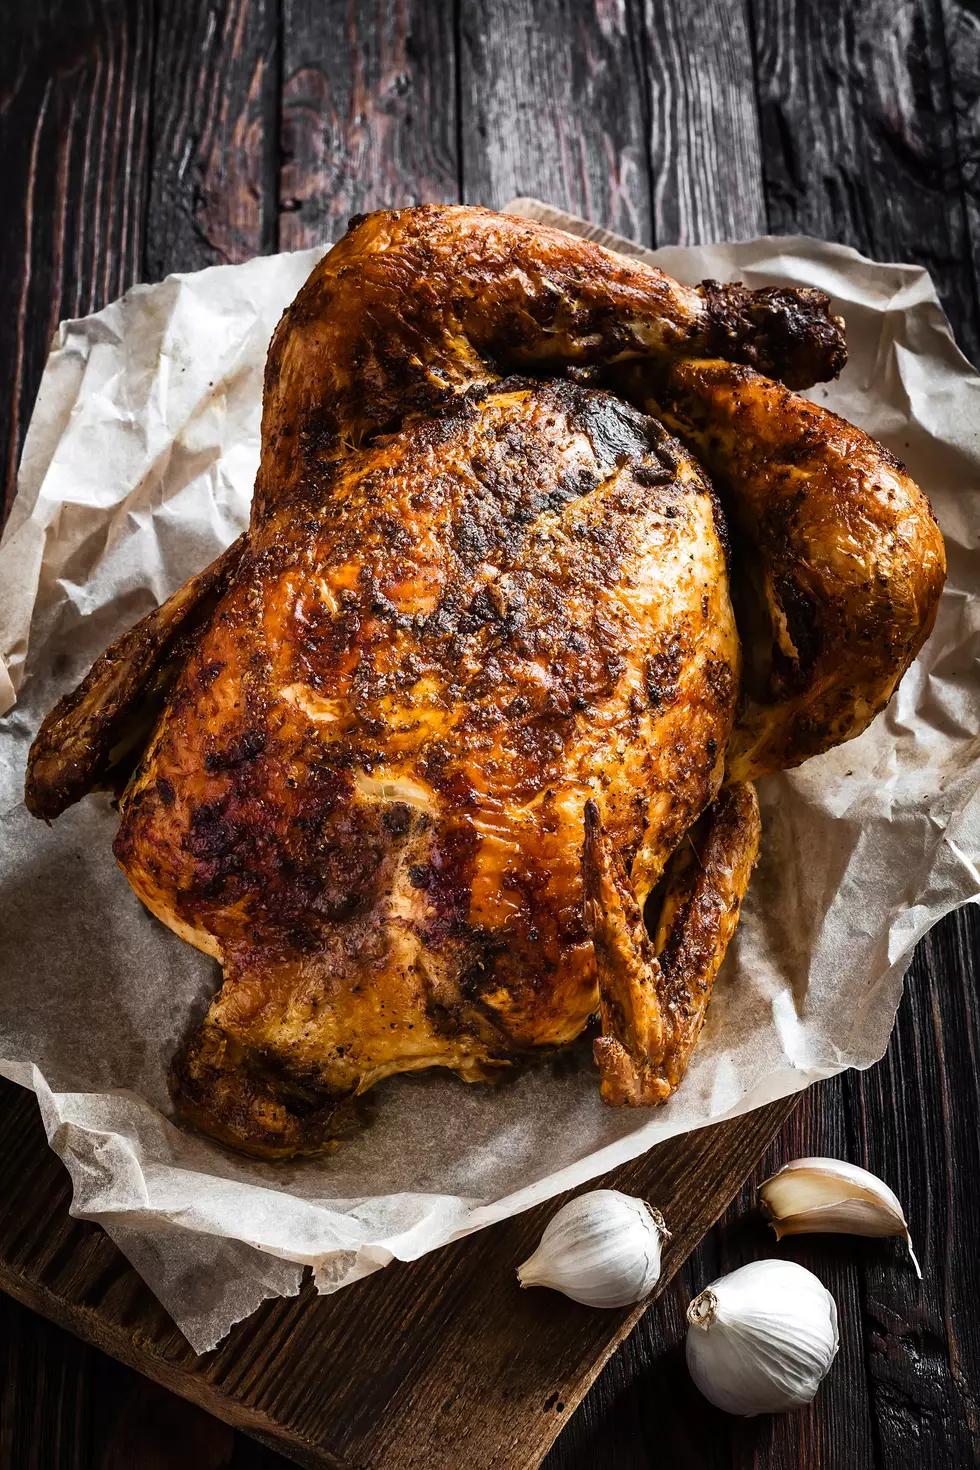 Safety Tips For Frying Your Thanksgiving Turkey